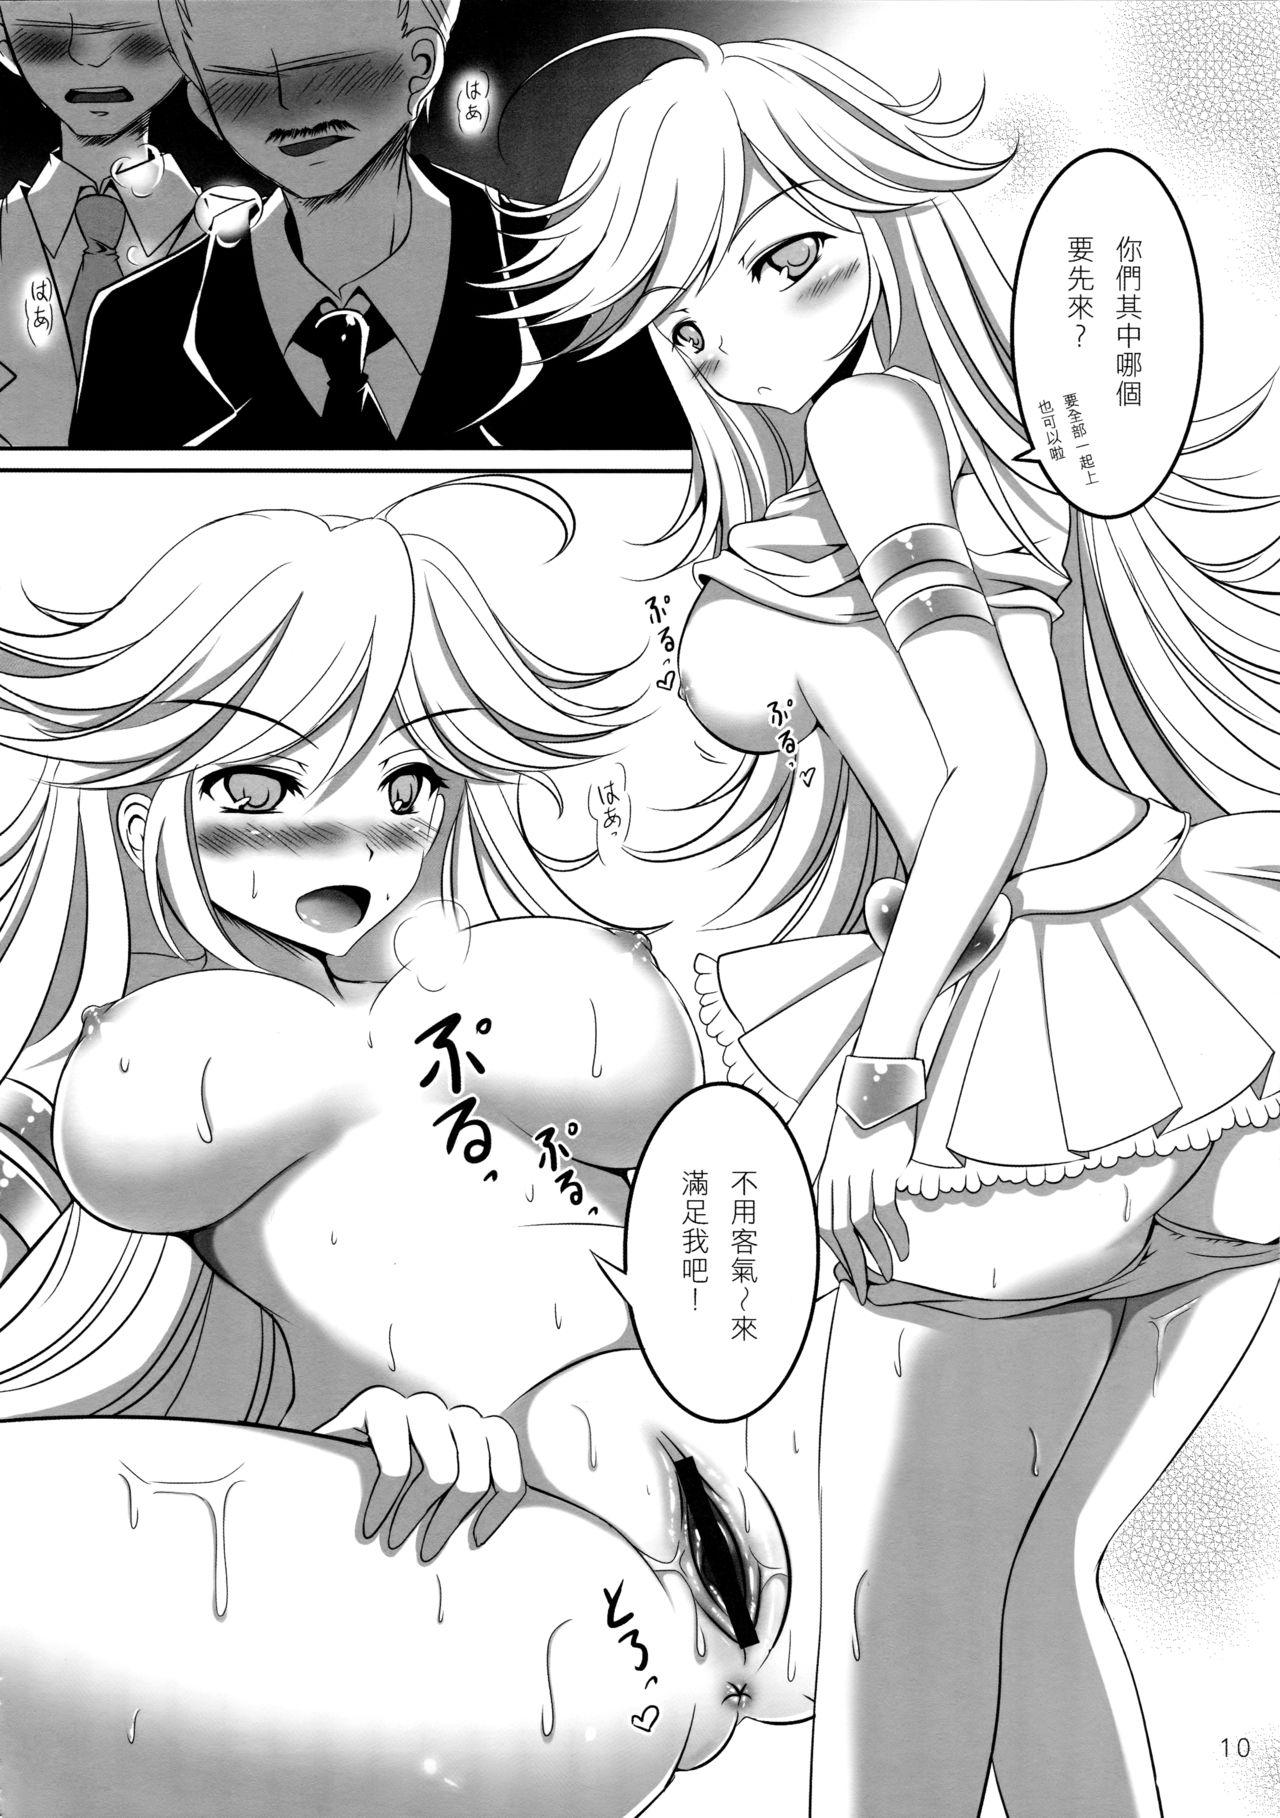 Gays Angel Bitches! - Panty and stocking with garterbelt Suckingcock - Page 10